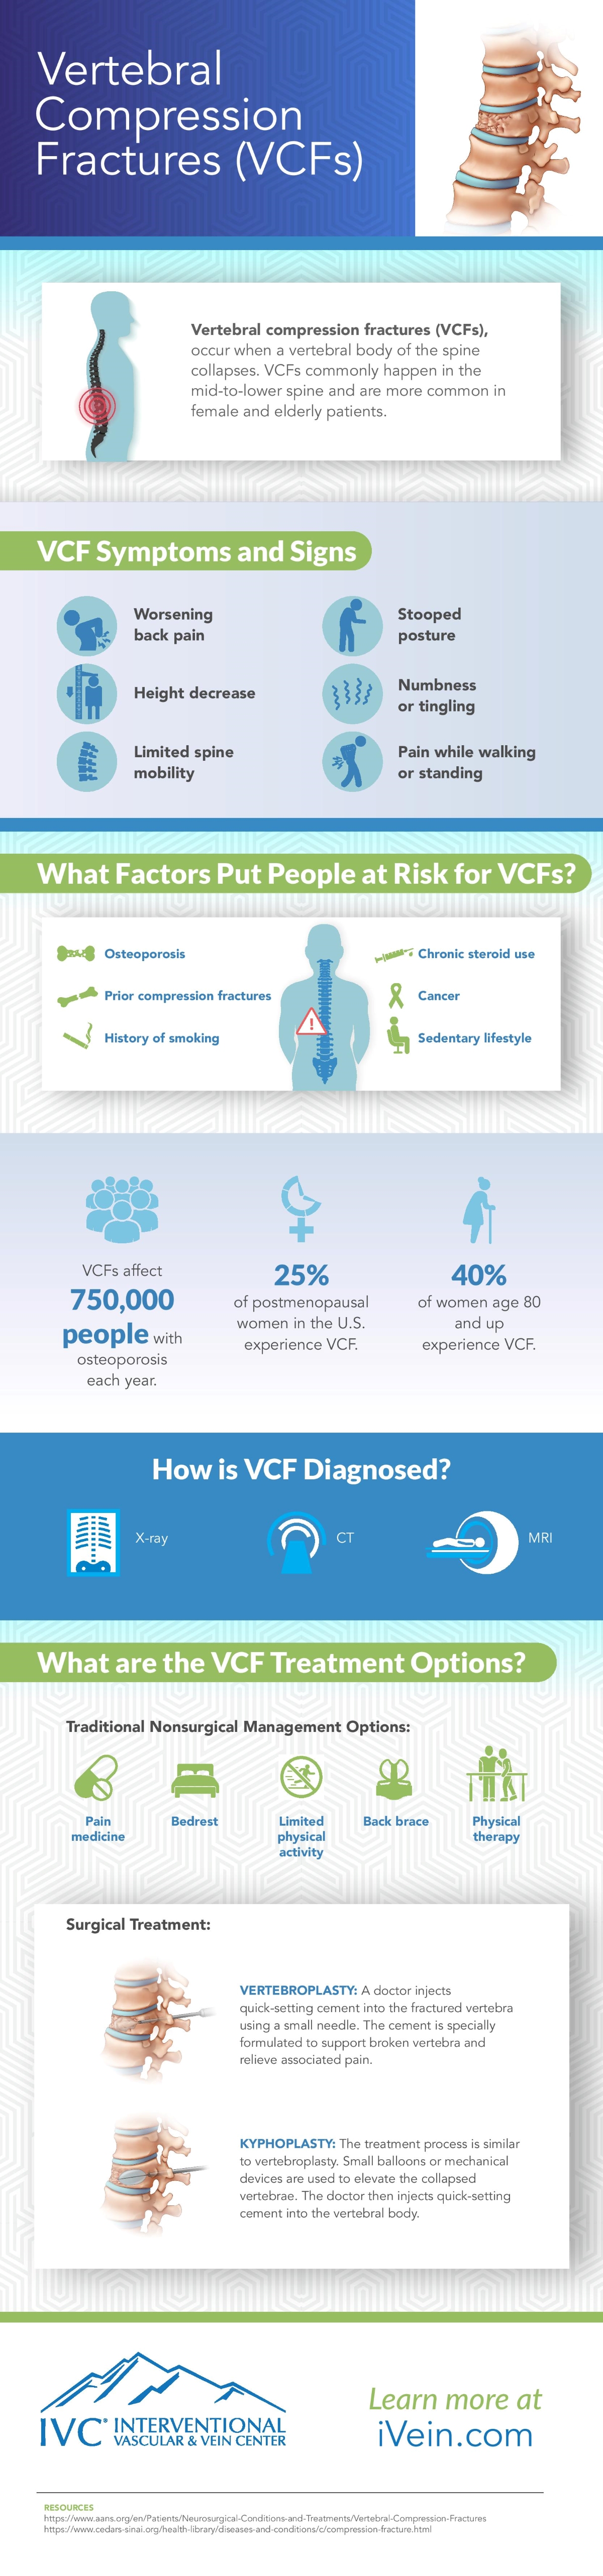 infographic describing the diagnosis and treatment of vertebral compression fractures